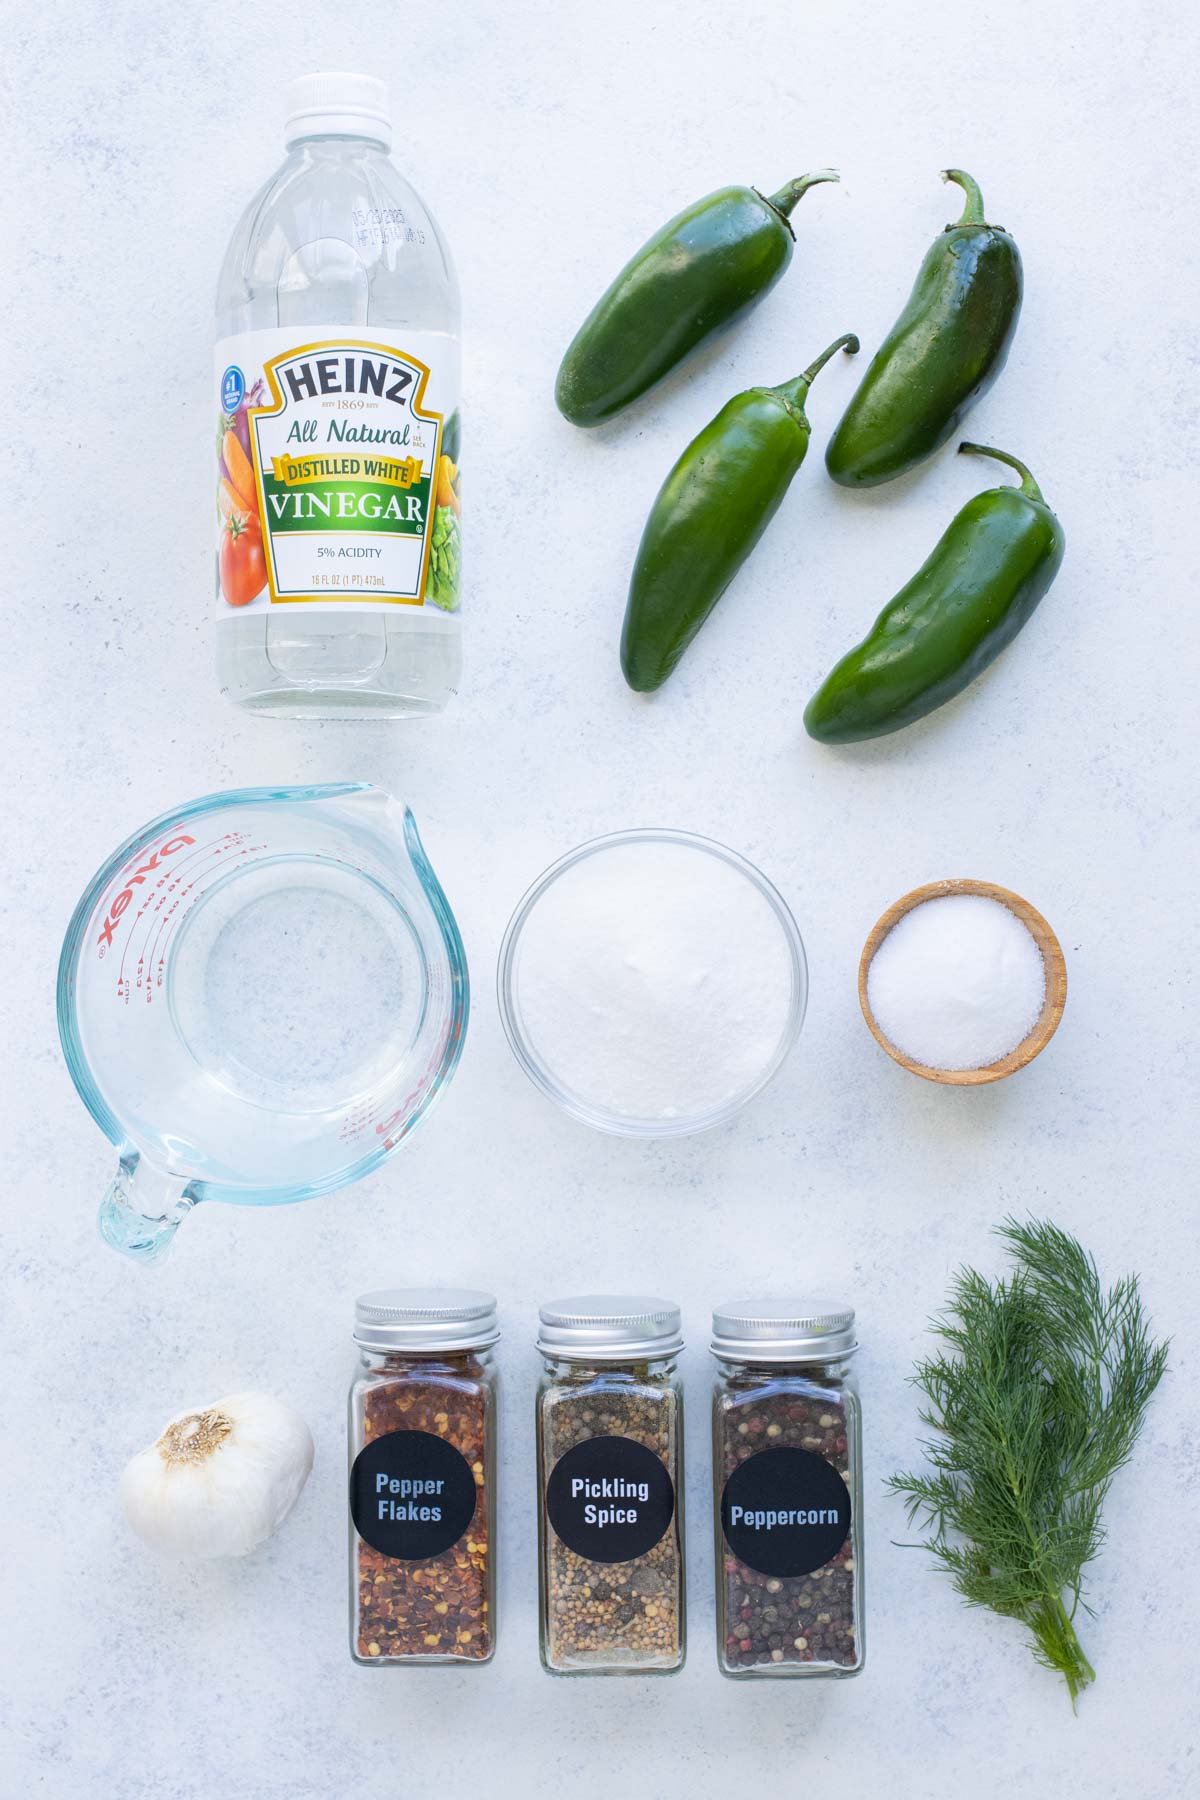 Jalapeños, vinegar, water, sugar, salt, and spices are the ingredients for pickled jalapeños.